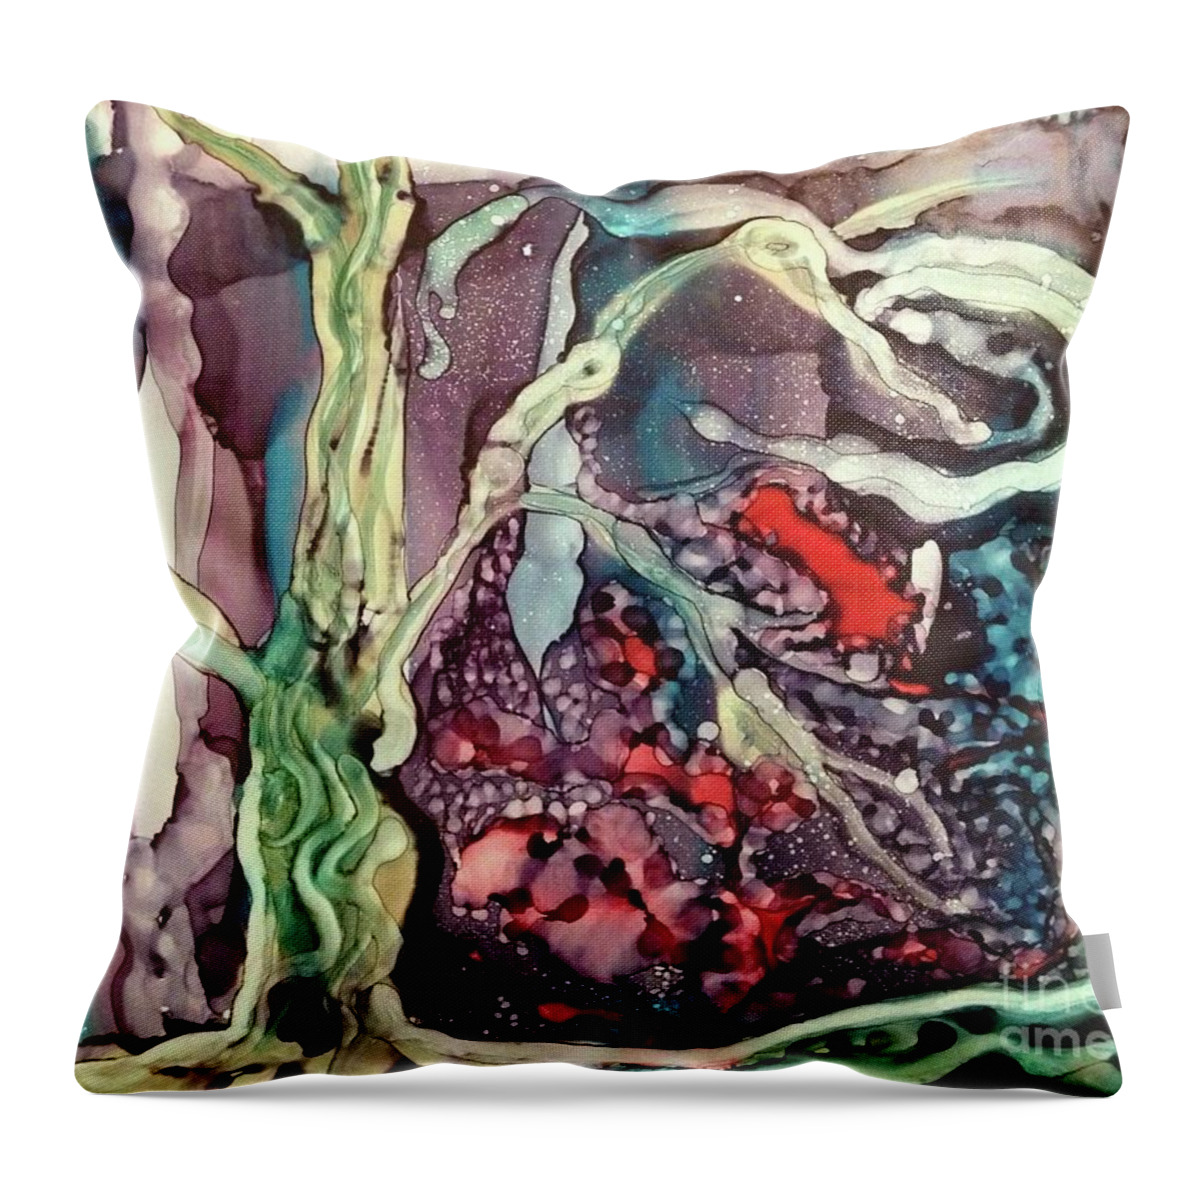 Ghost Throw Pillow featuring the painting Lost Souls by Jeanette Rodriguez